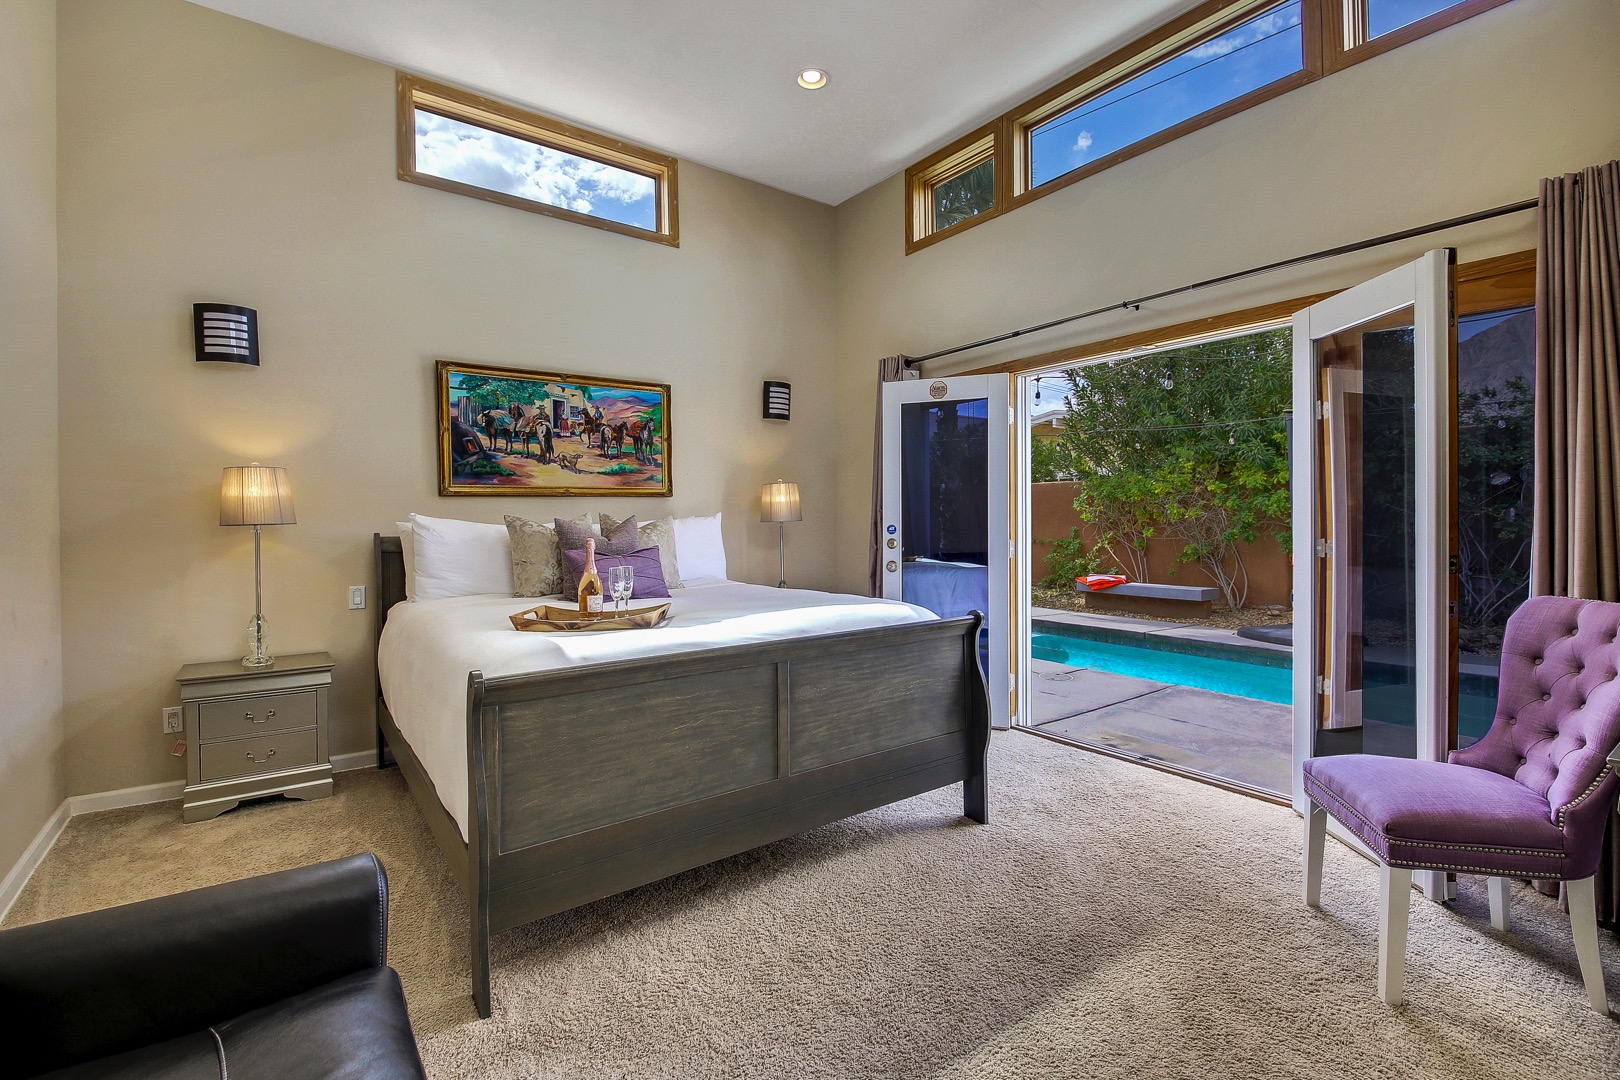 The Master Bedroom Suite features a King-size bed, Queen sofa sleeper,  Smart TV, and private double french doors that lead to the pool and spa.